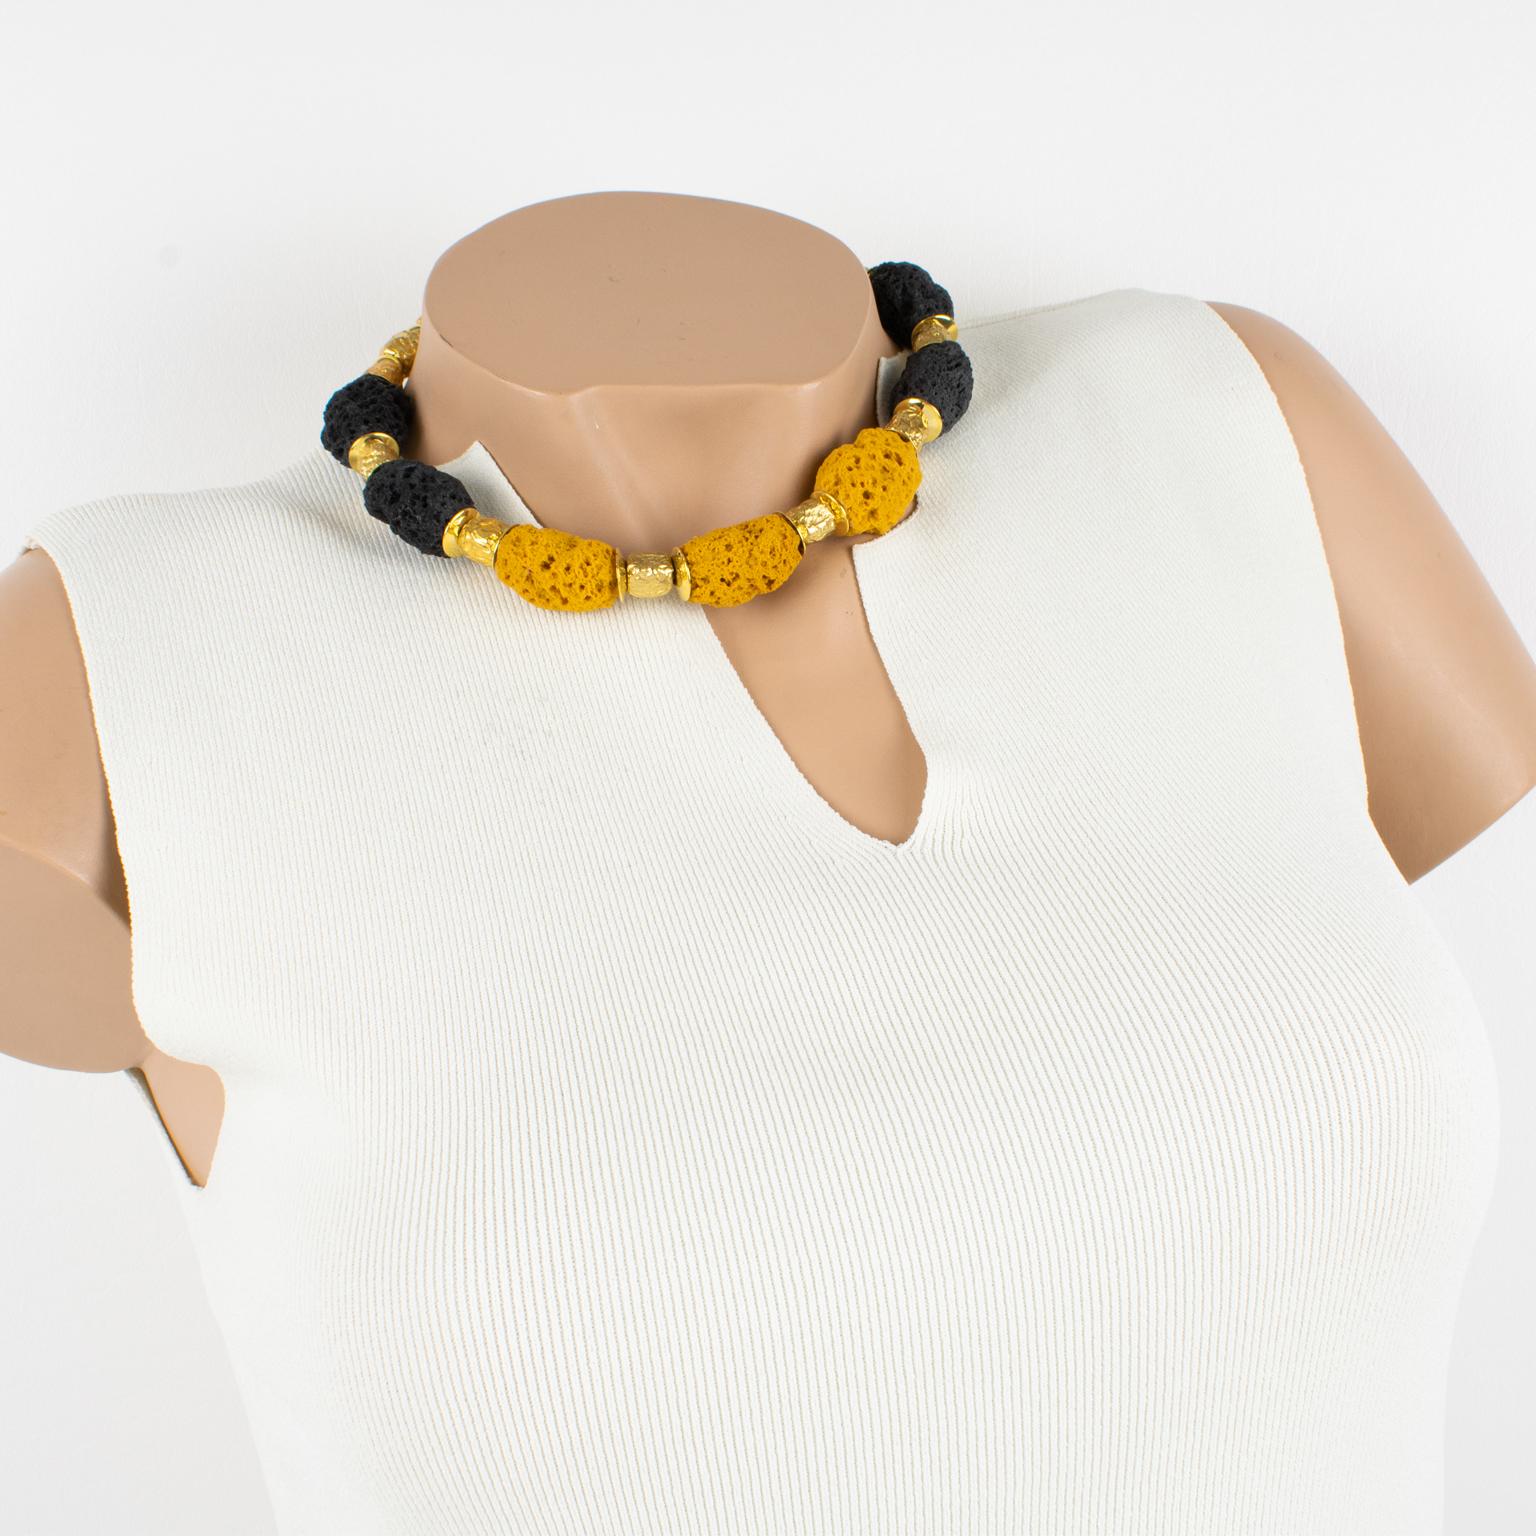 Elegant Balenciaga Paris signed necklace from the 1980s. Features heavy gilt metal carved beaded choker complimented with resin lava rock or sponge-like beads. The resin beads have assorted colors of black and yellow saffron. Locking box clasp with